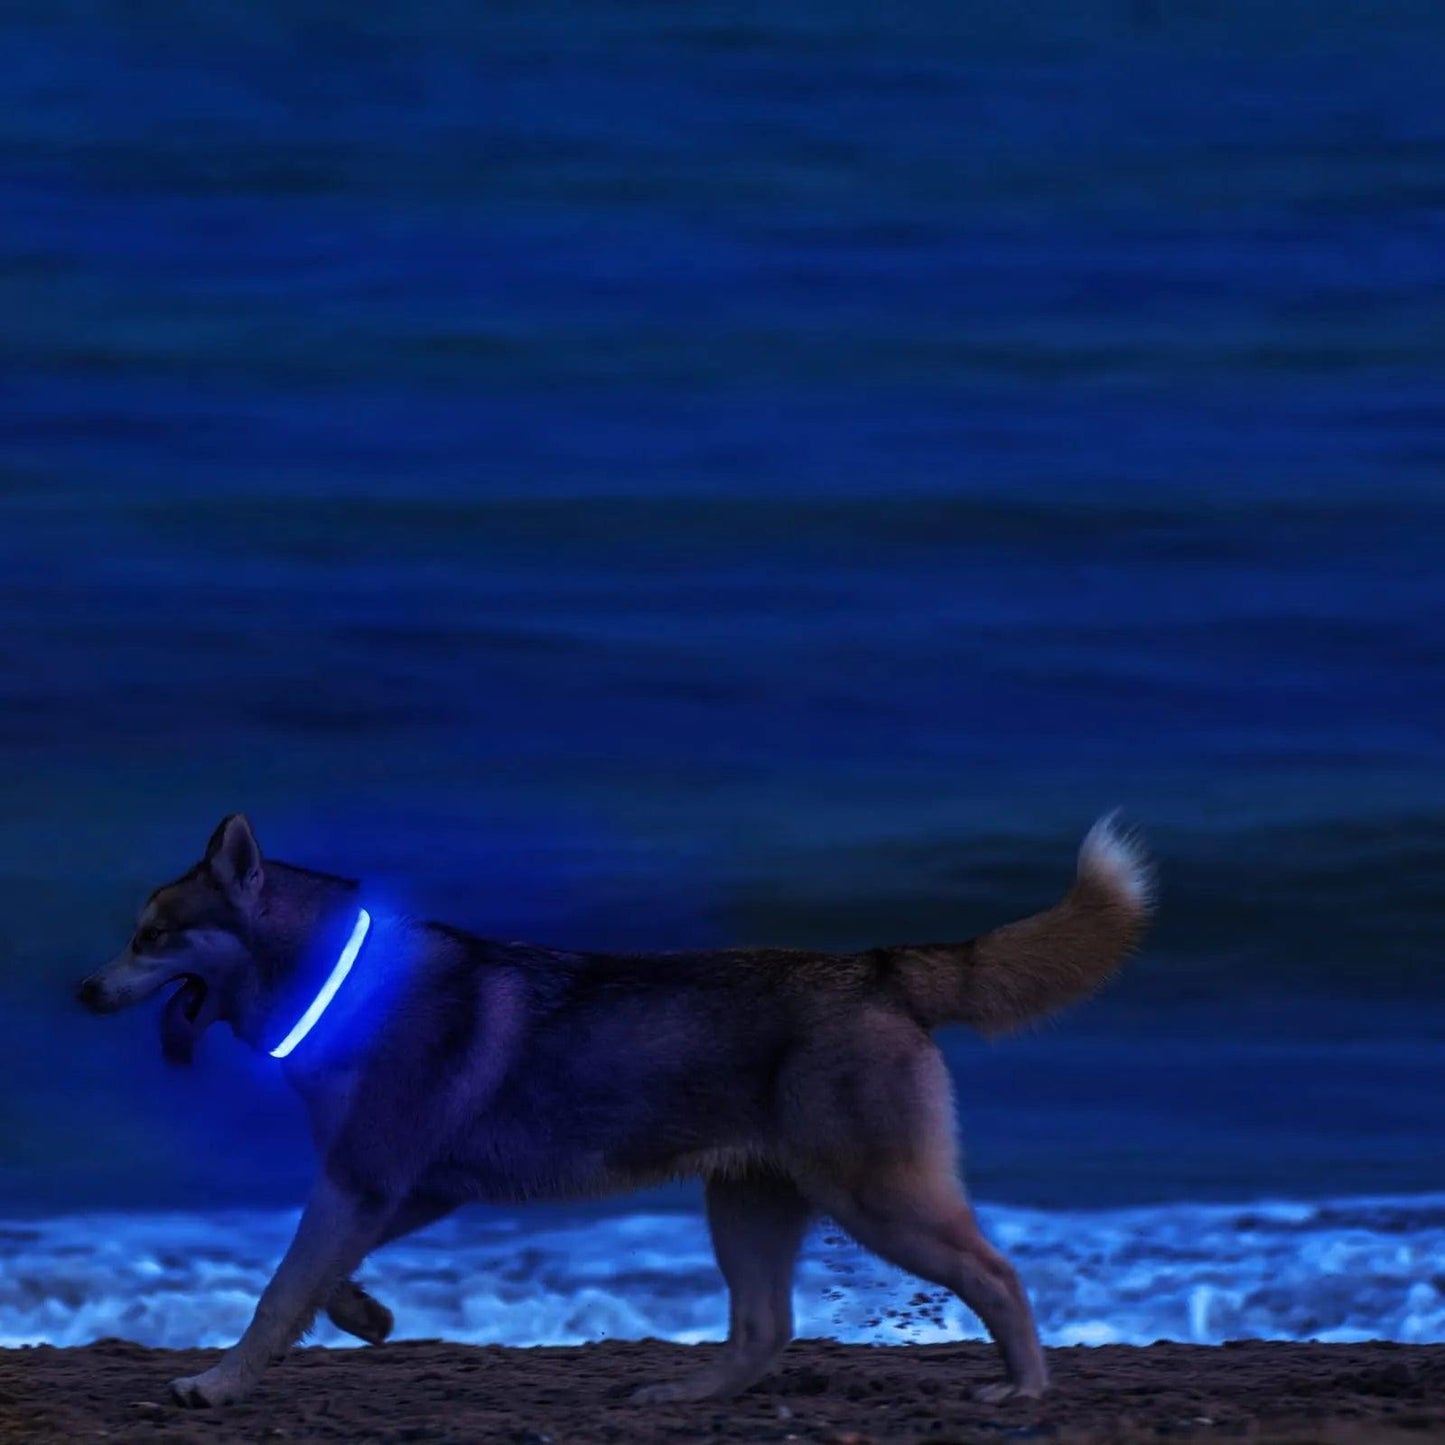 USB Rechargeable LED Dog Collar with 3 Modes - MR. GIFT